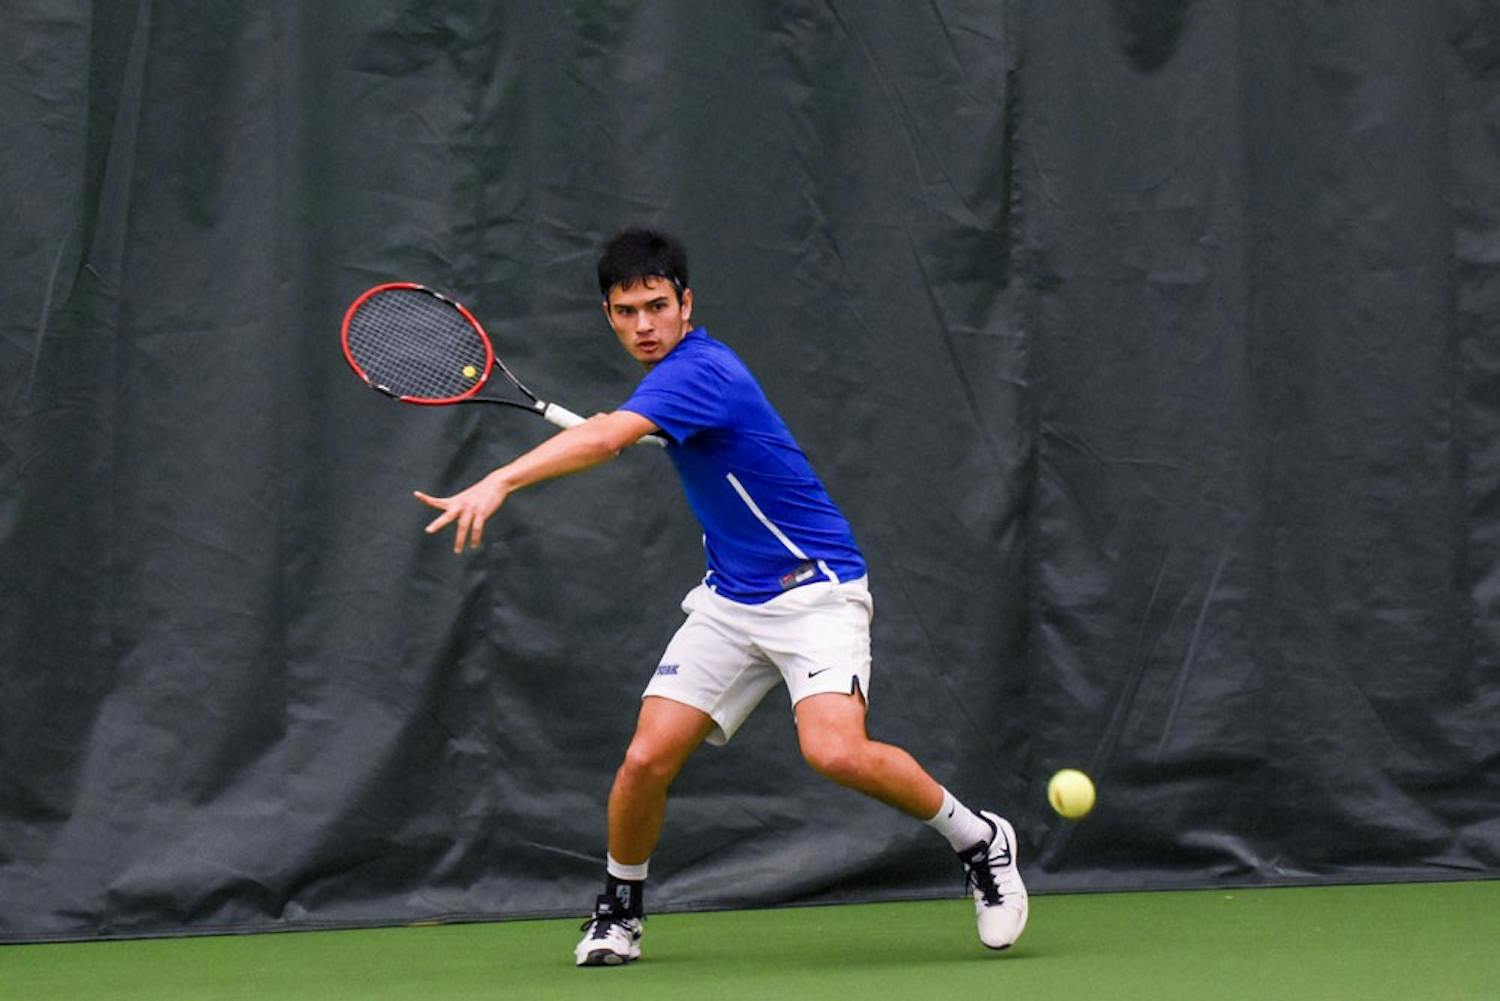 Senior Pablo Alvarez gets ready to return a ball during a match at the Miller Tennis Center. The men's tennis team is preparing for its regular season finale before the MAC Tournament.&nbsp;